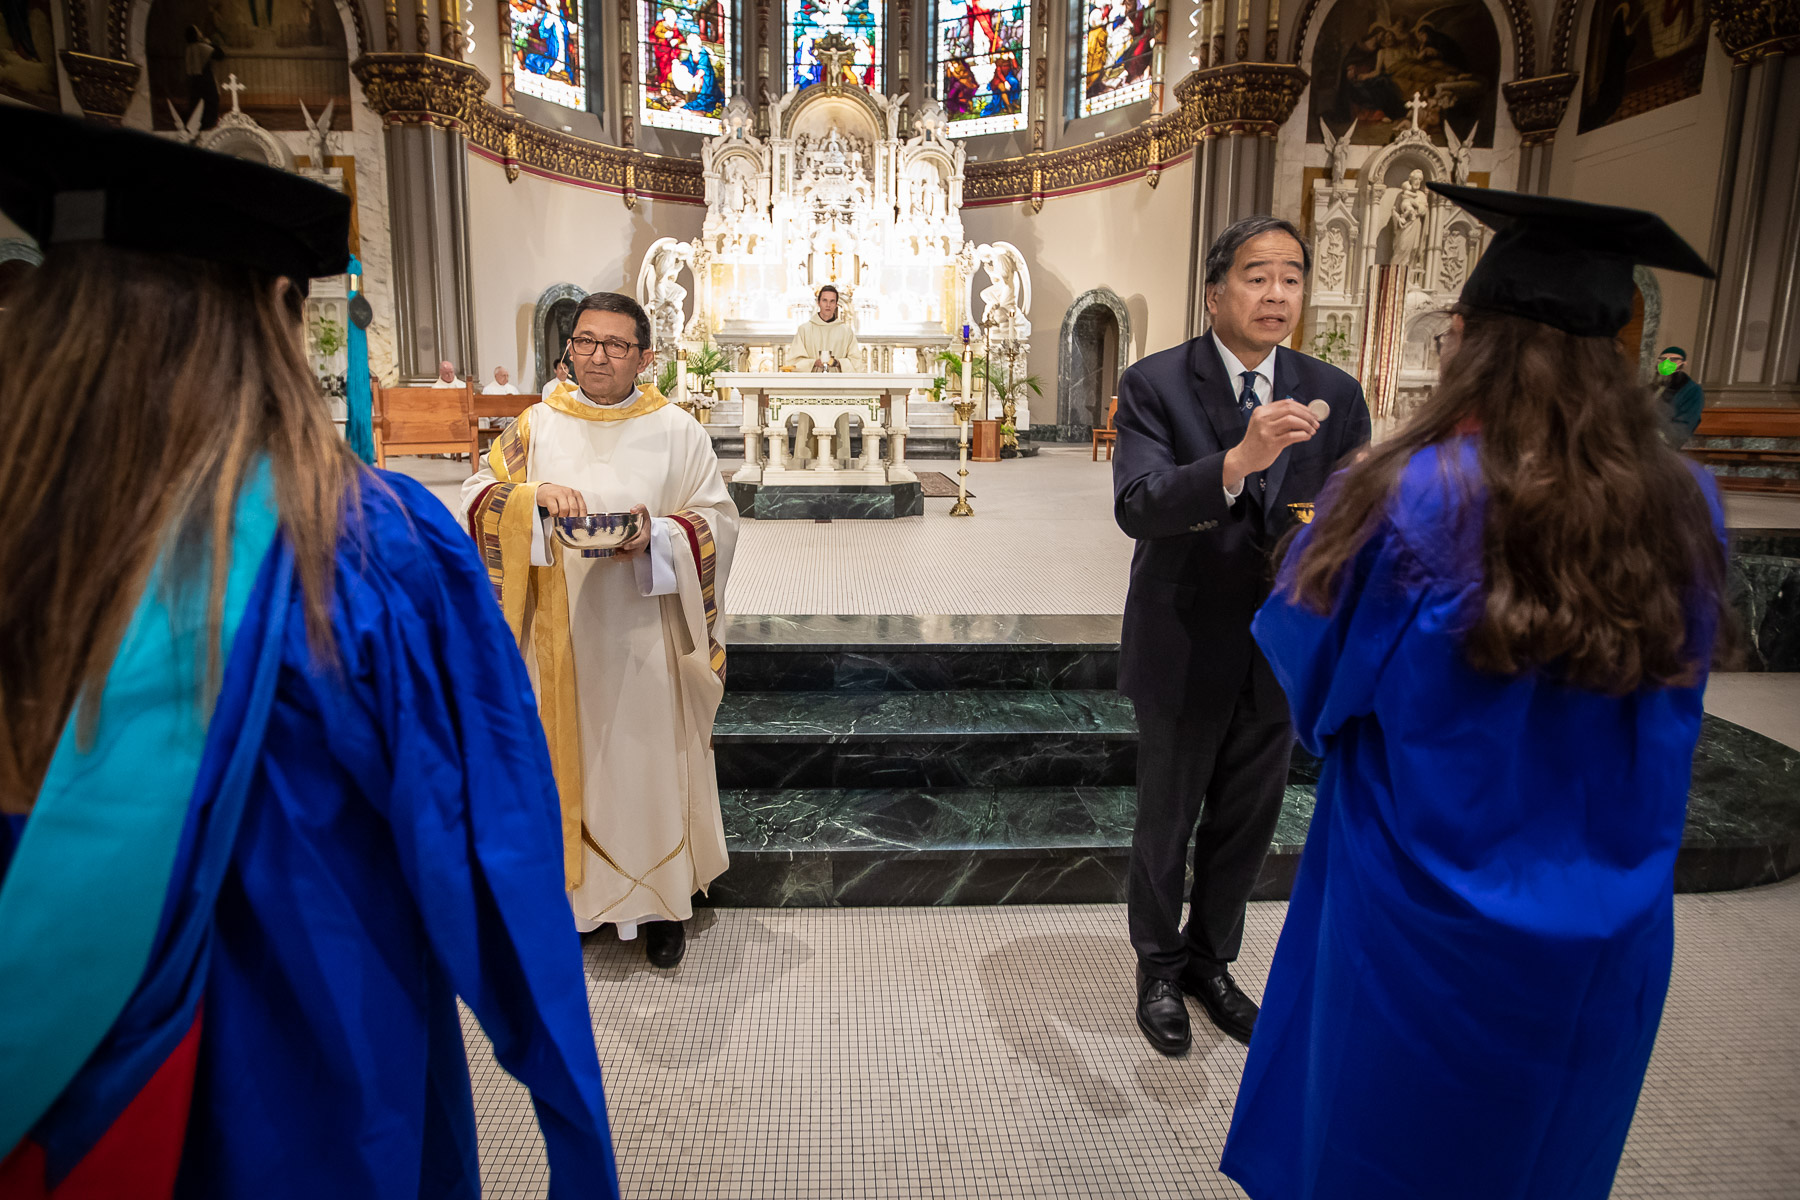 Rev. Guillermo Campuzano, C.M., and Dr. A. Gabriel Esteban, president, distribute communion during Baccalaureate Mass.